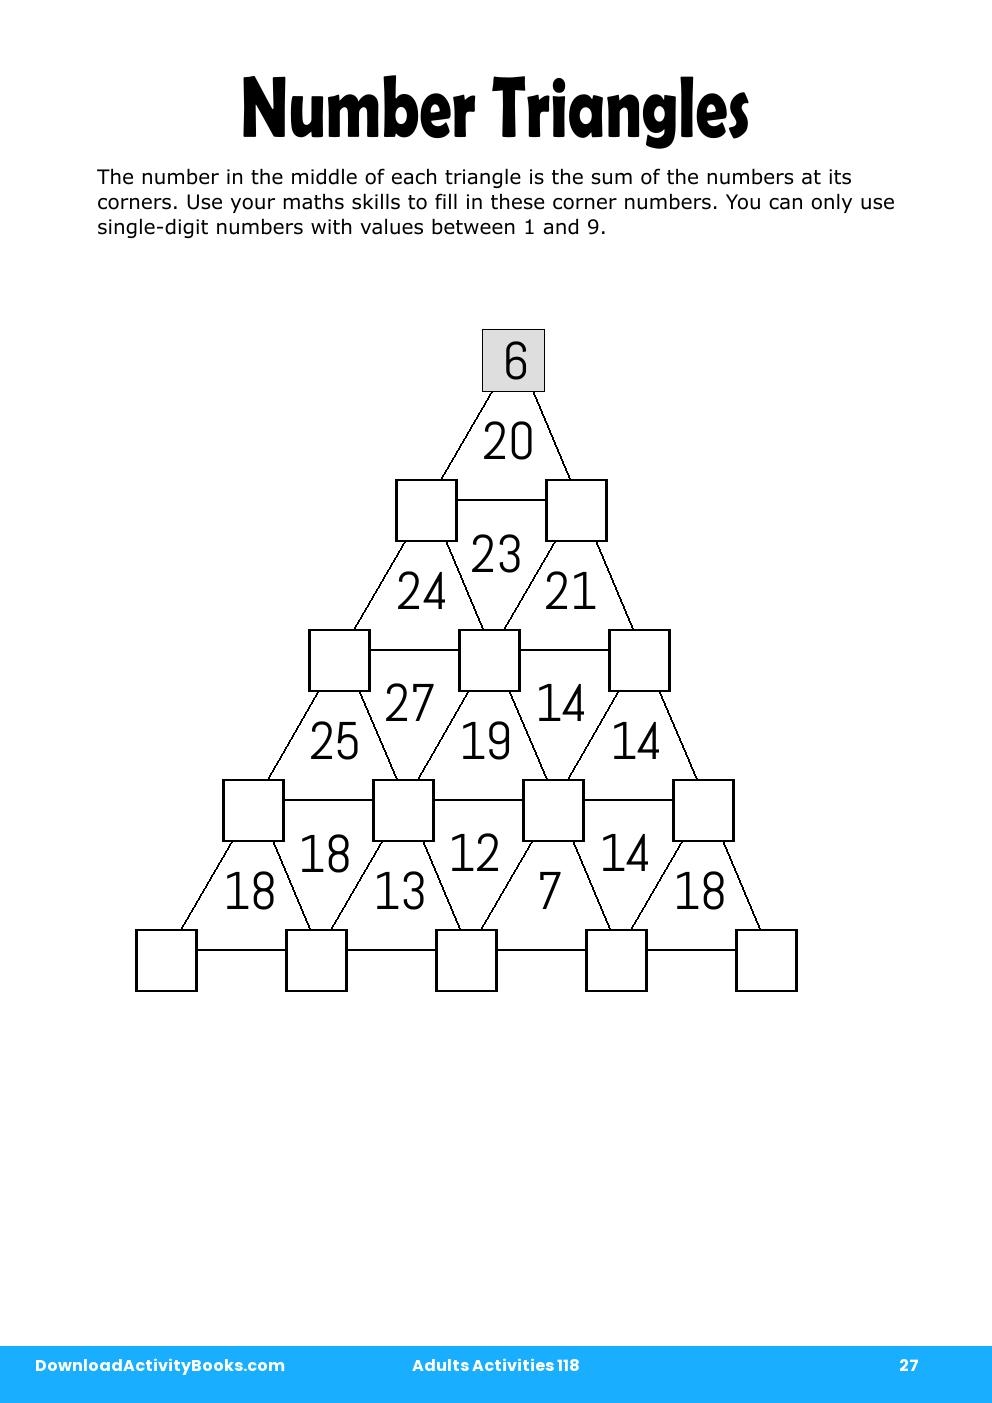 Number Triangles in Adults Activities 118